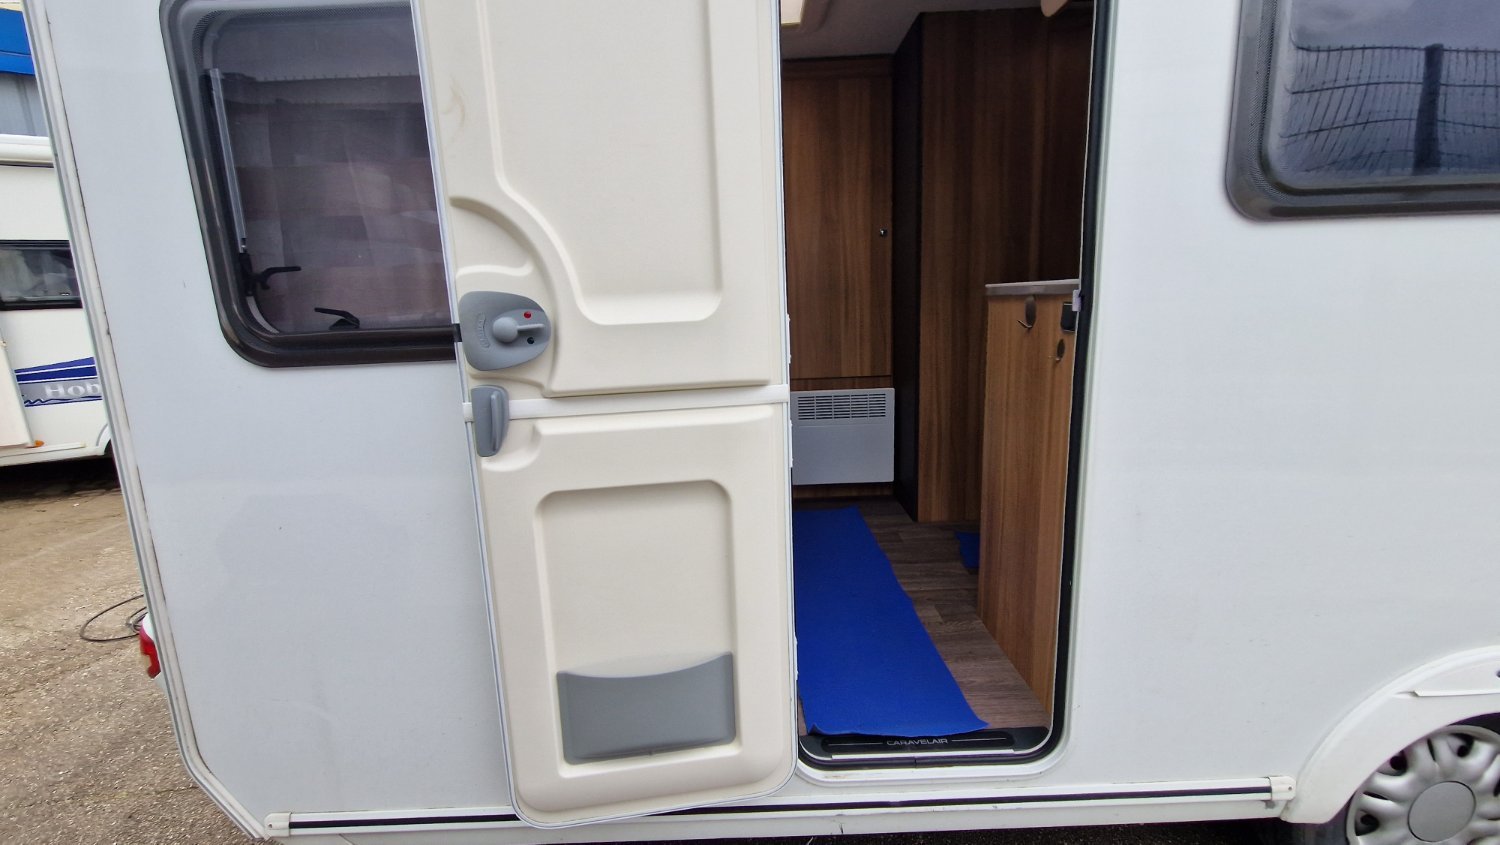 Caravelair Ambiance Style 470 